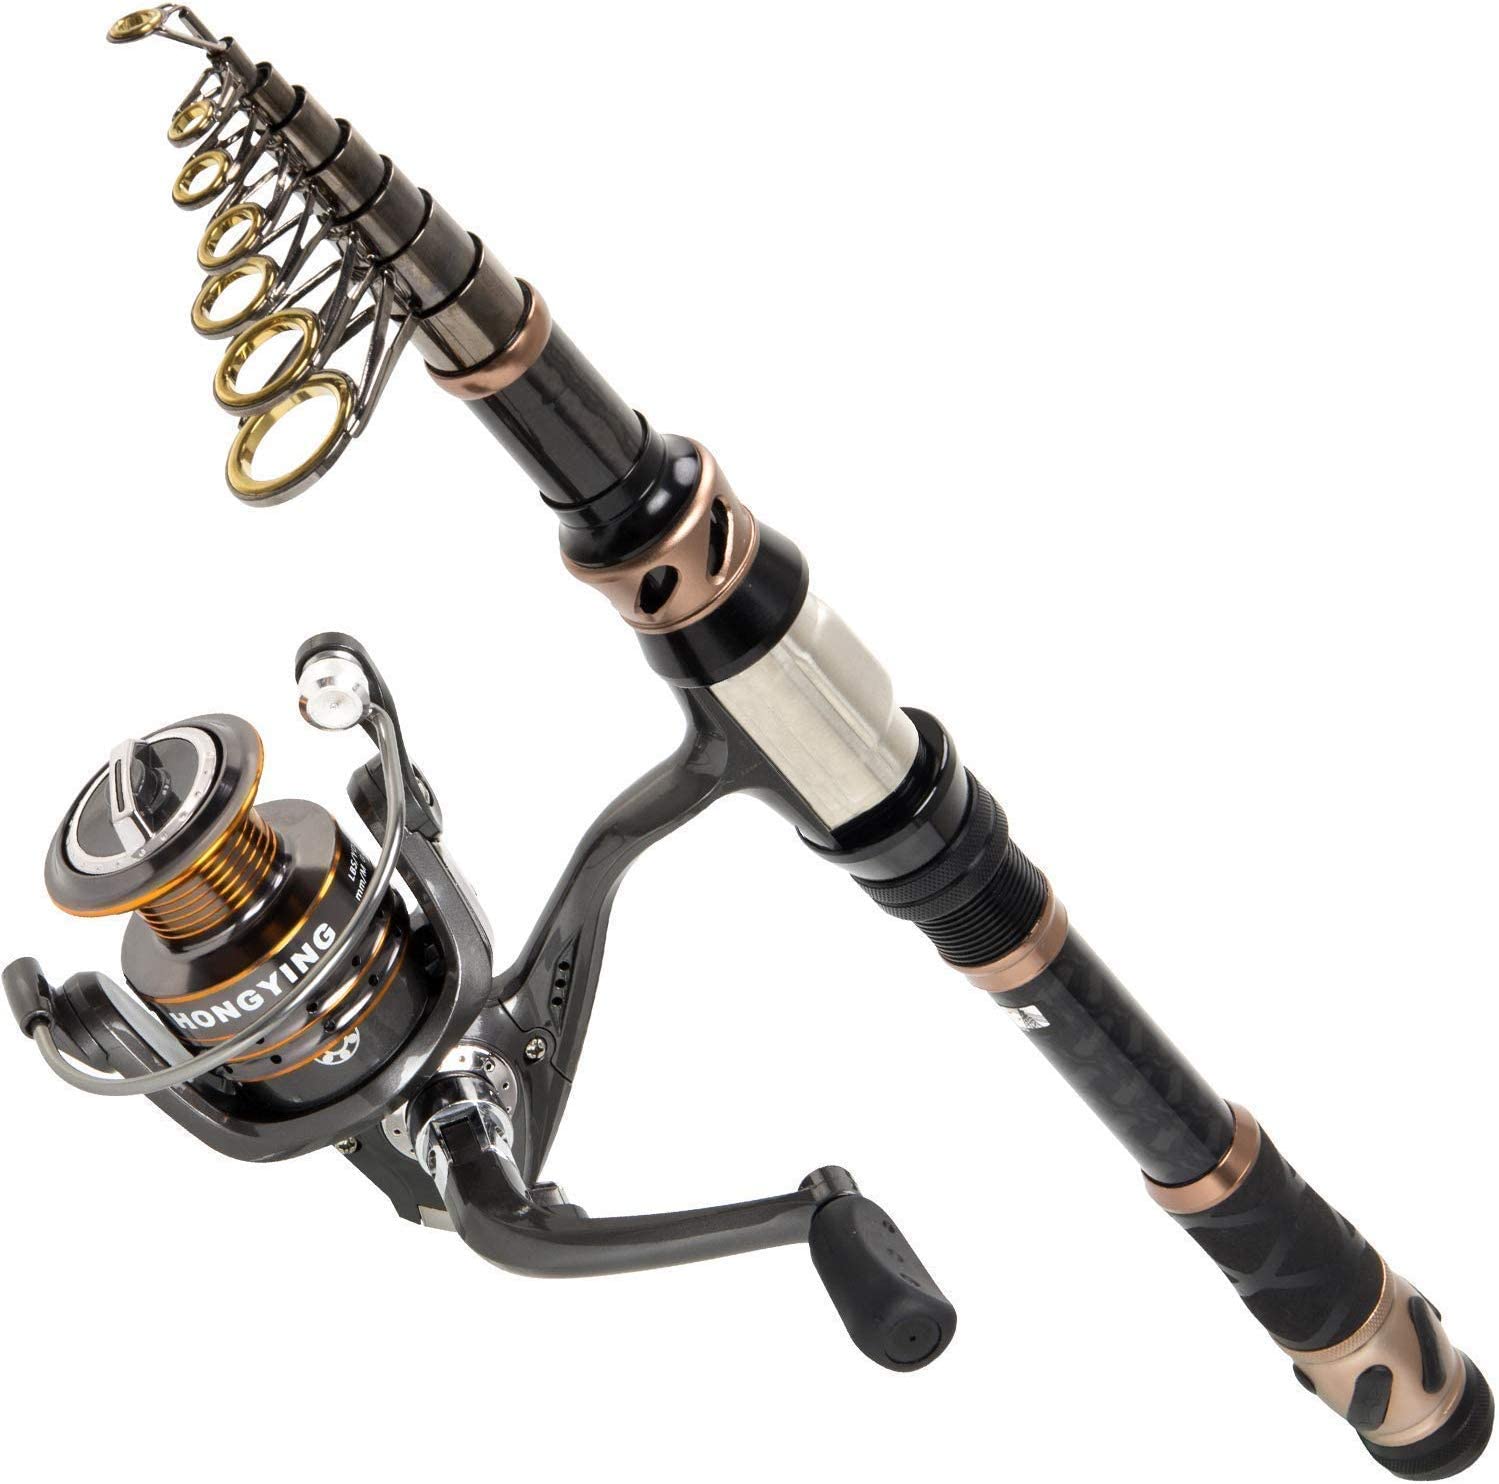 Lightweight Telescopic Fishing Rod and Spinning Reel Combos 